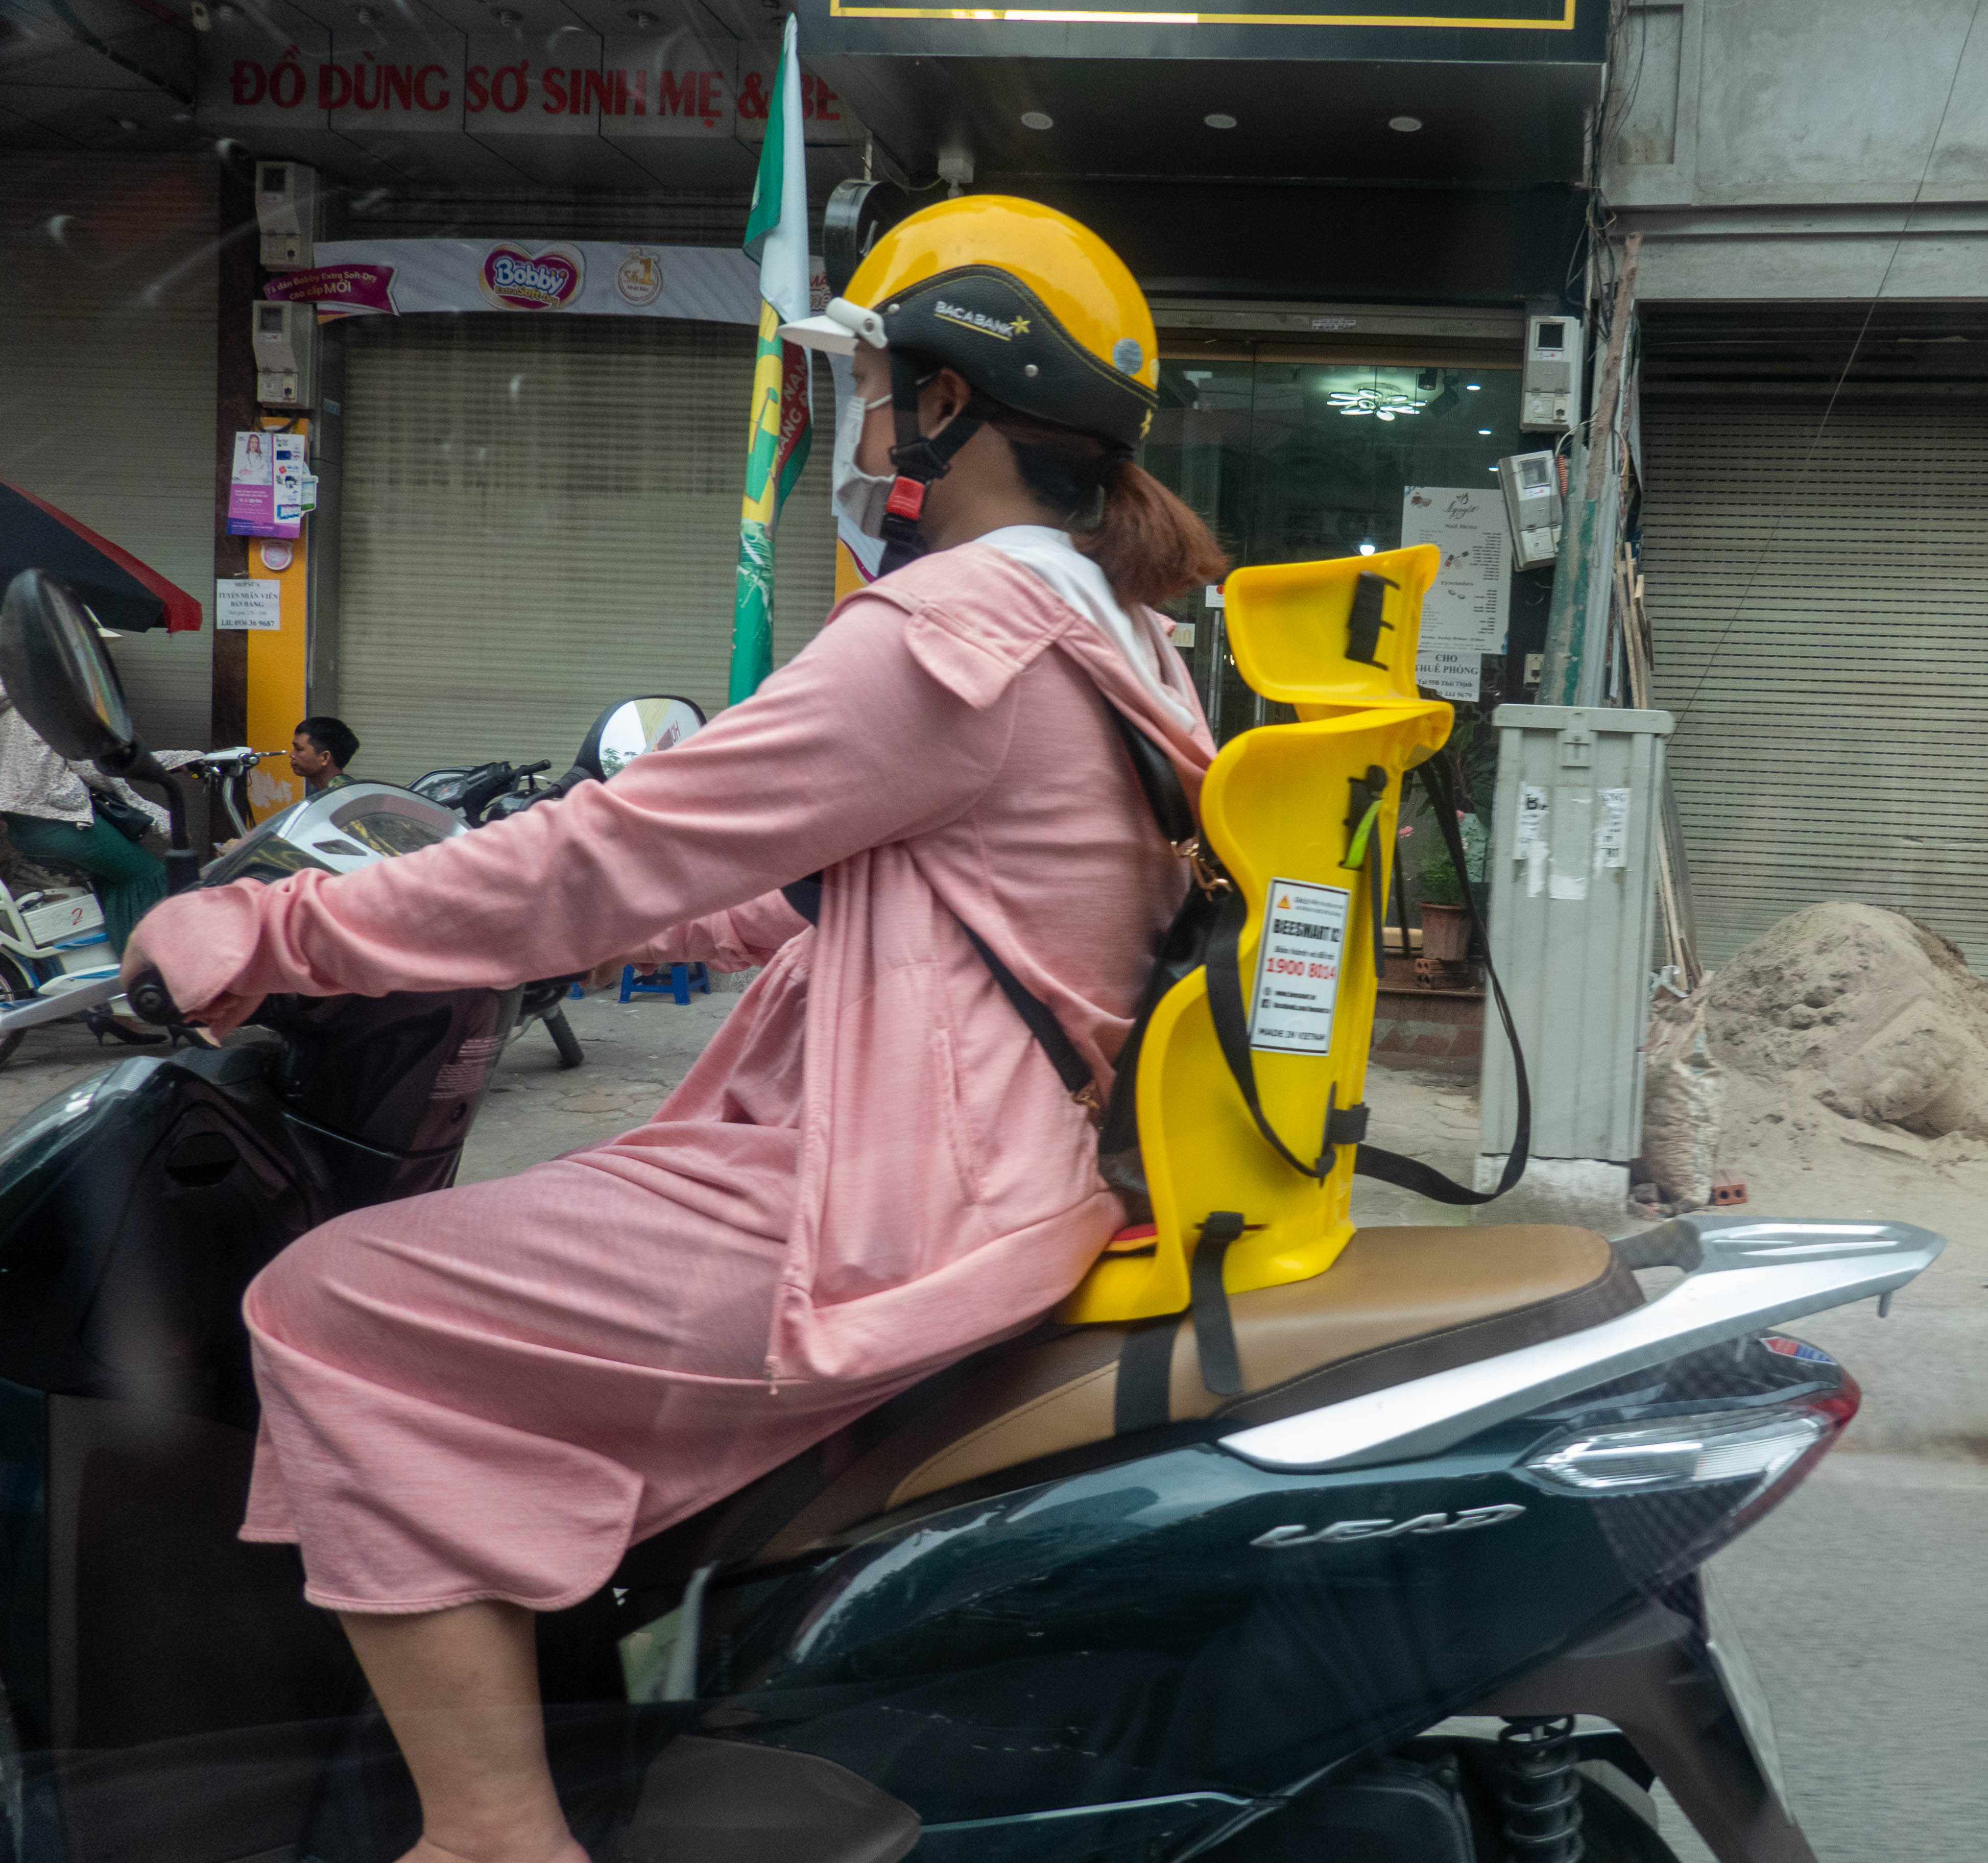 lady wearing yellow helmet on a motorbike. A yellow child holder is strapped to her back.